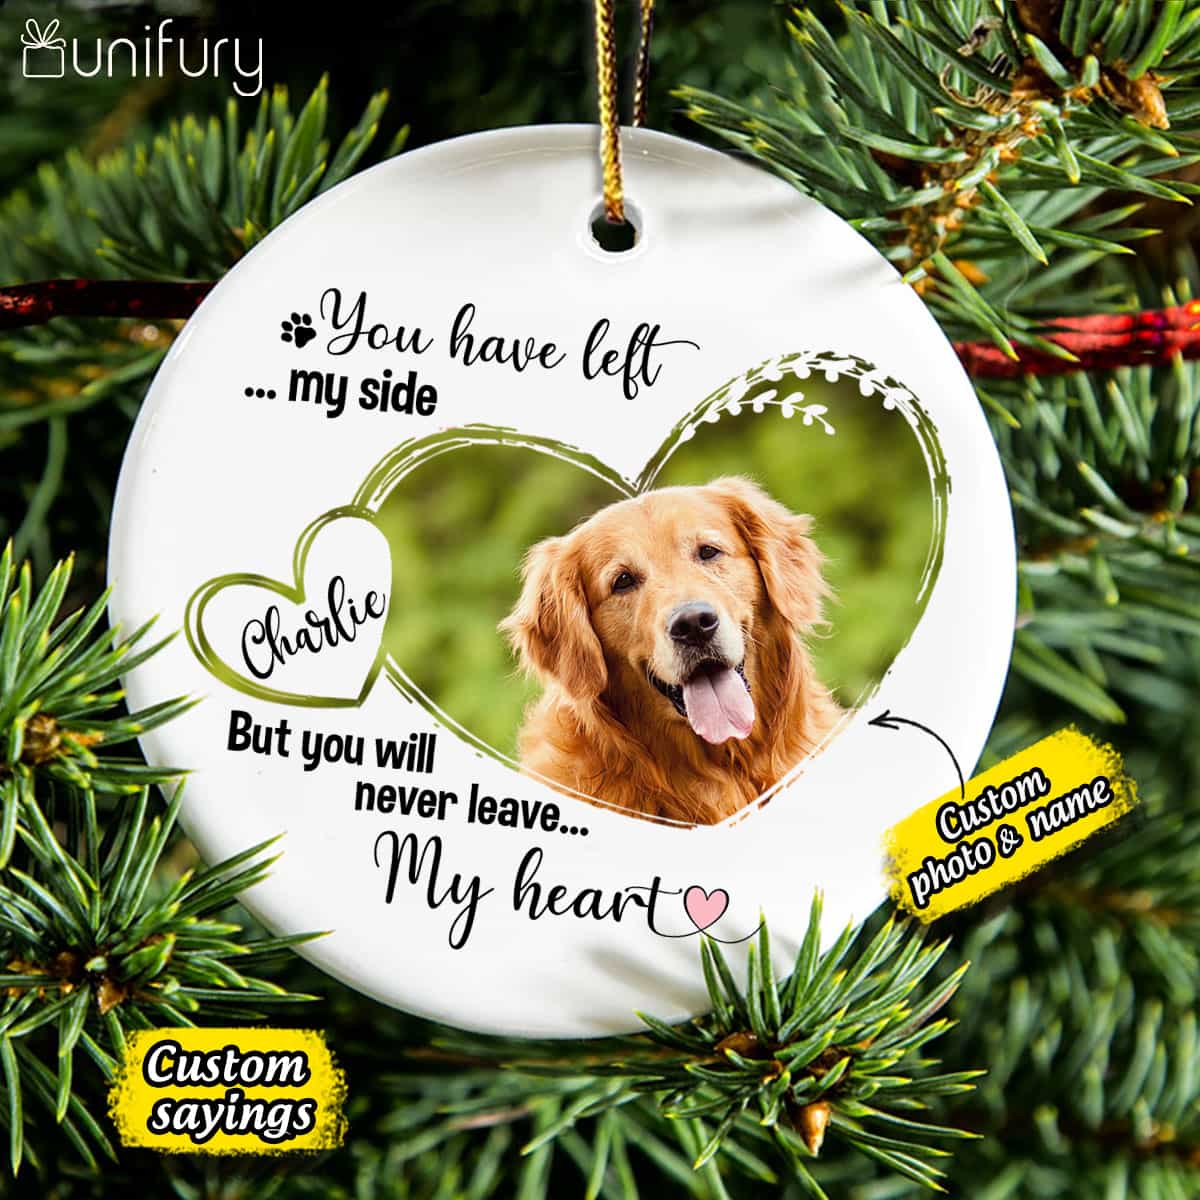 personalized pet memorial gifts